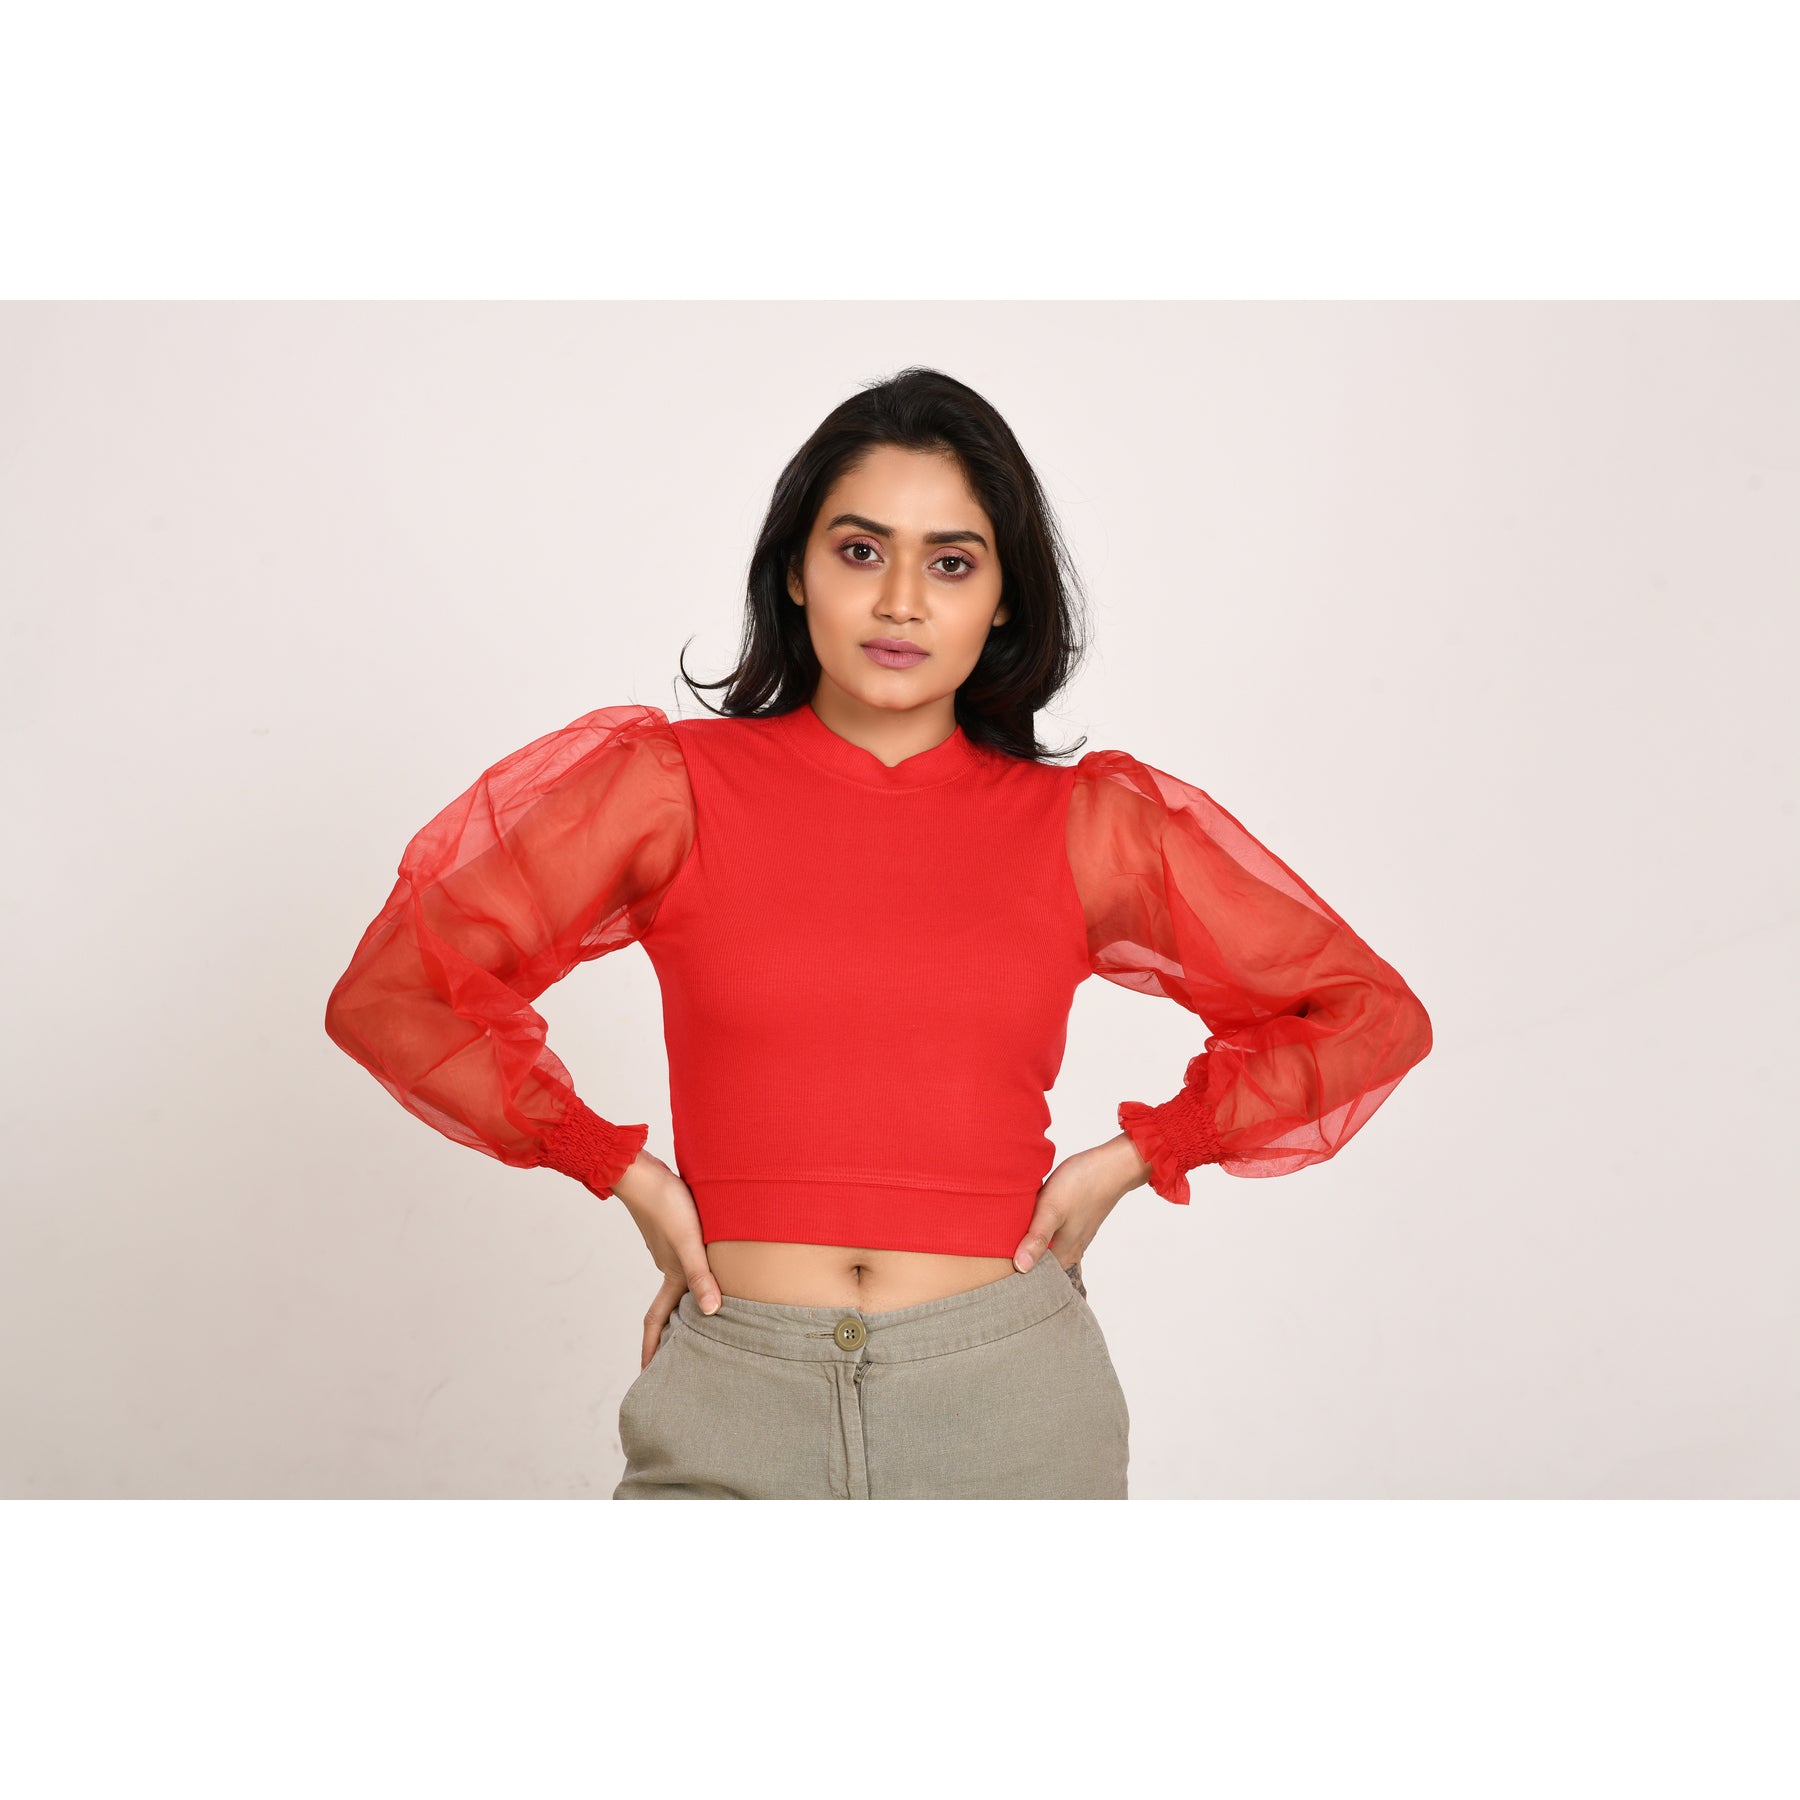 Hosiery Blouses with Puffy Organza Full Sleeves -  Red - Blouse featured